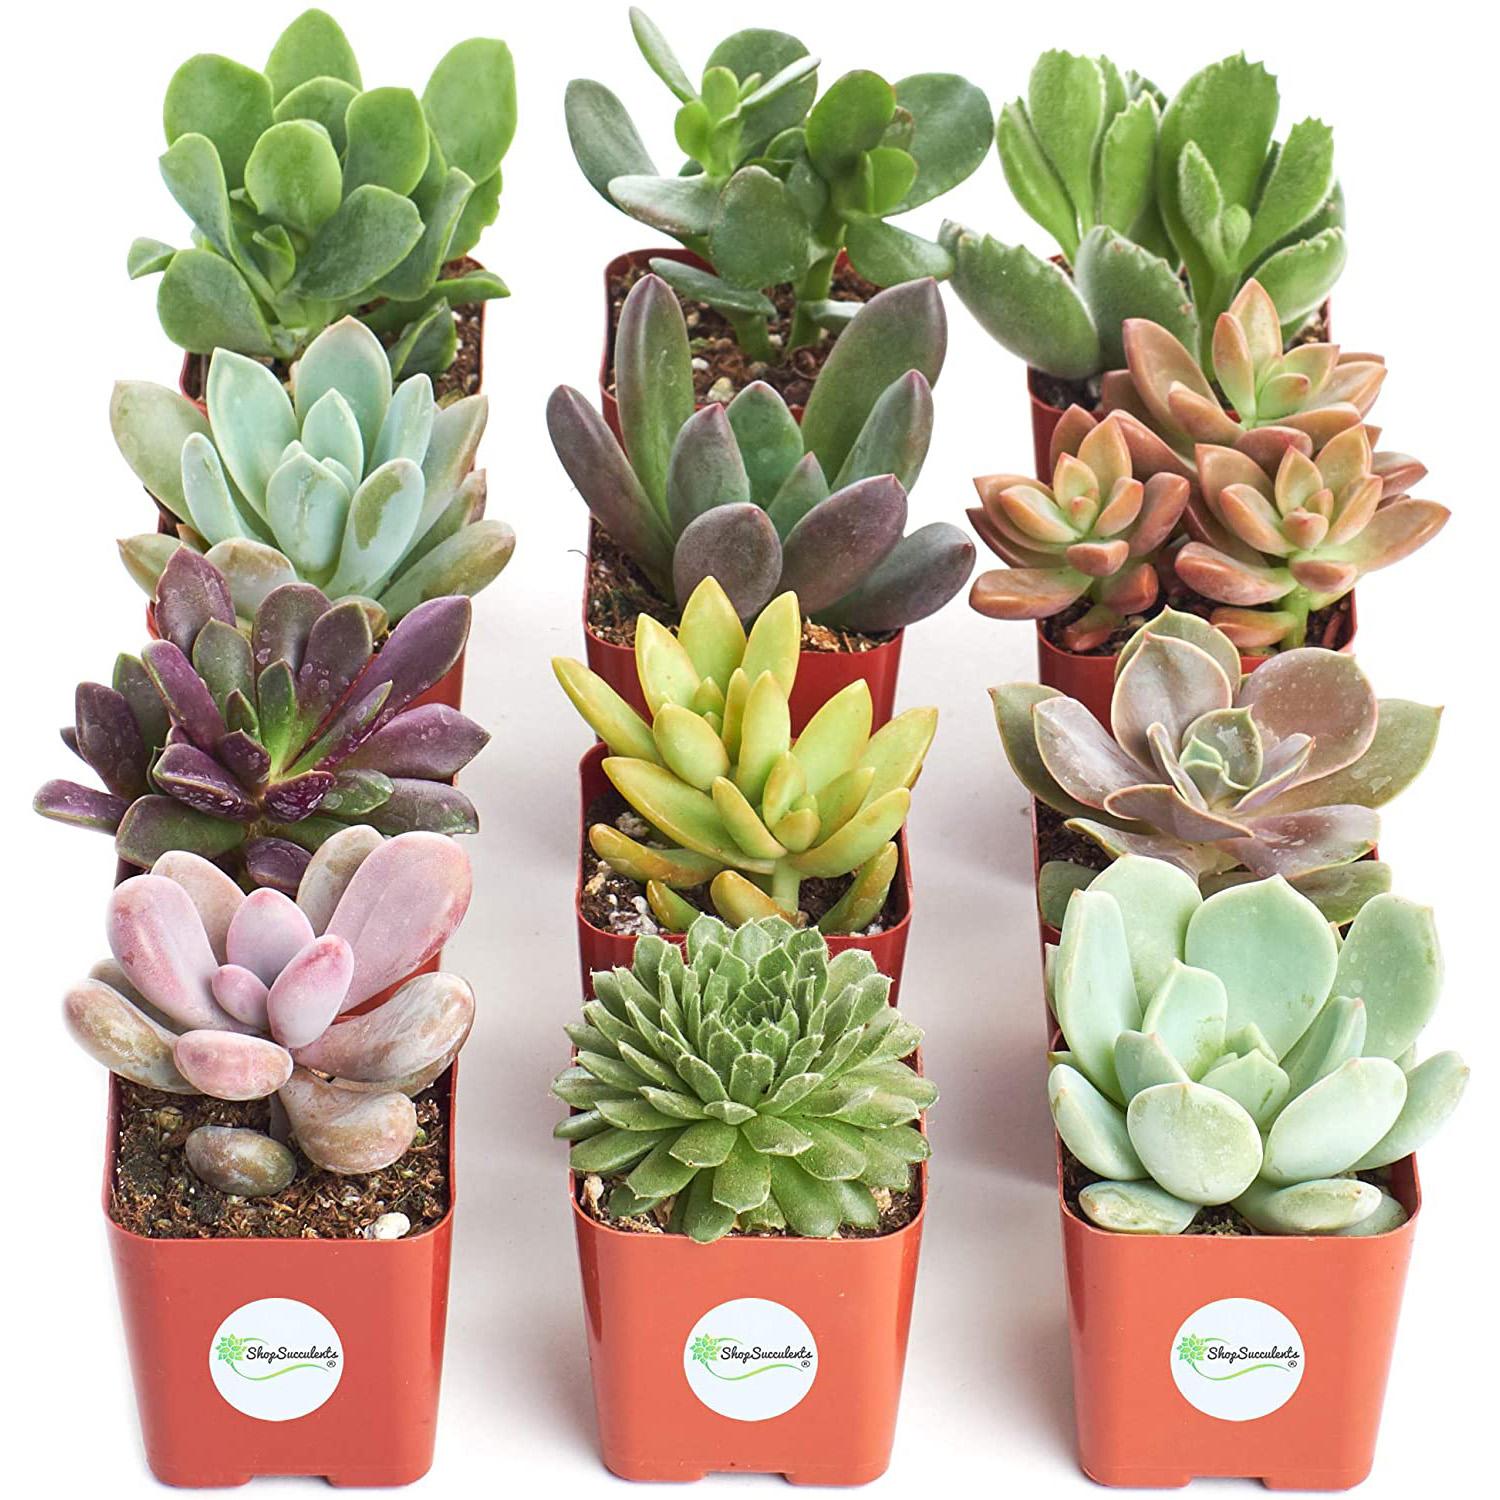 12 Variety Pack of Mini Succulents for $20.39